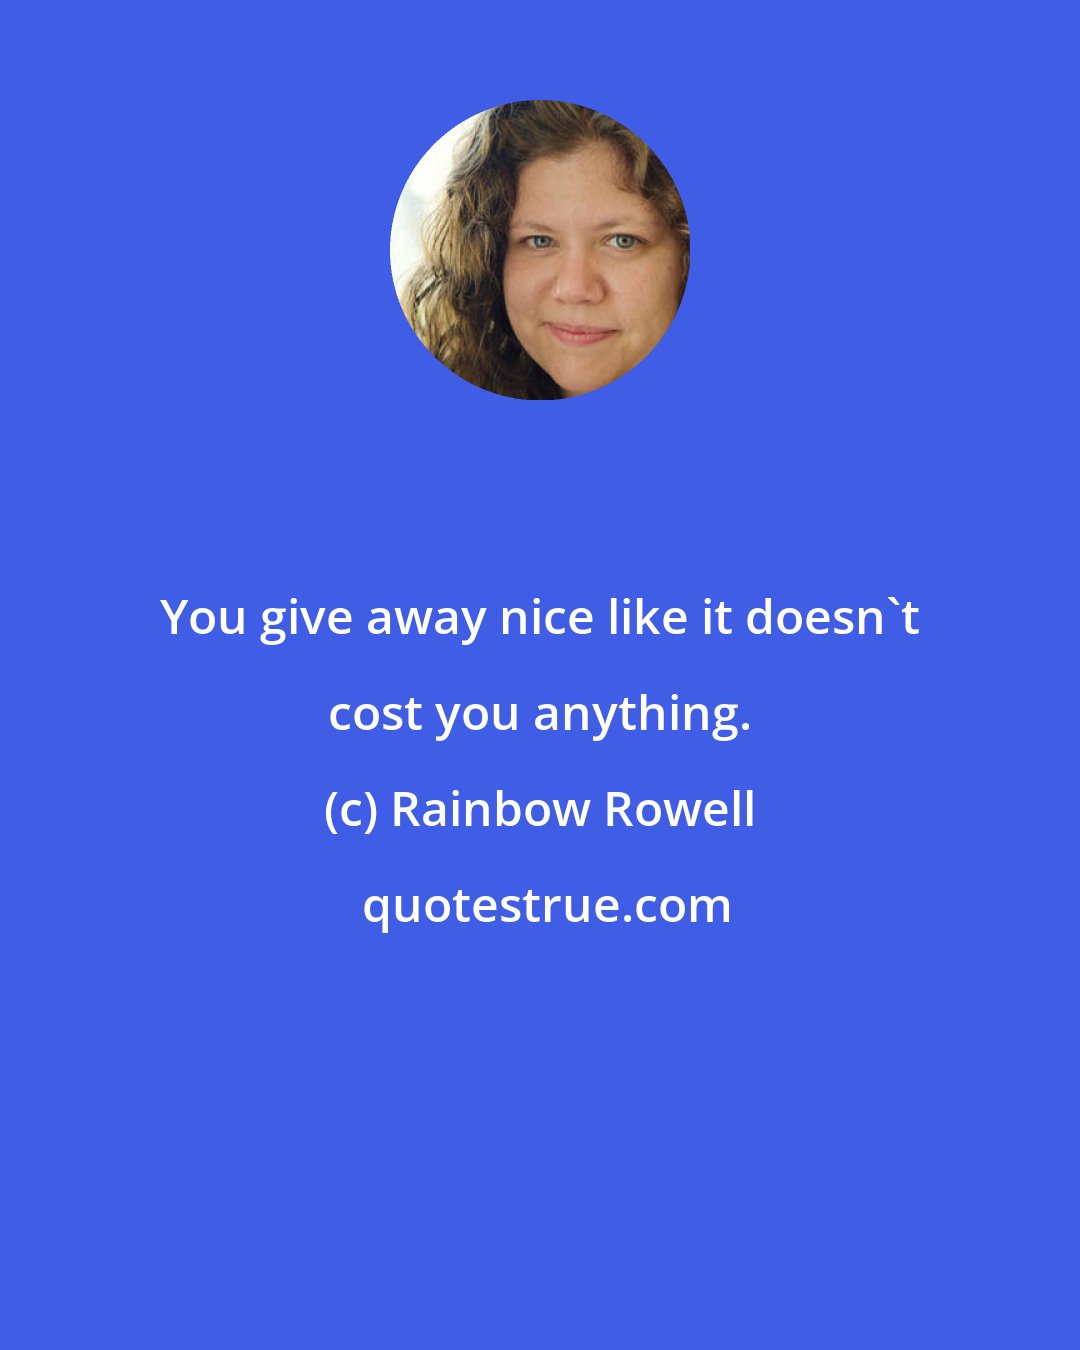 Rainbow Rowell: You give away nice like it doesn't cost you anything.